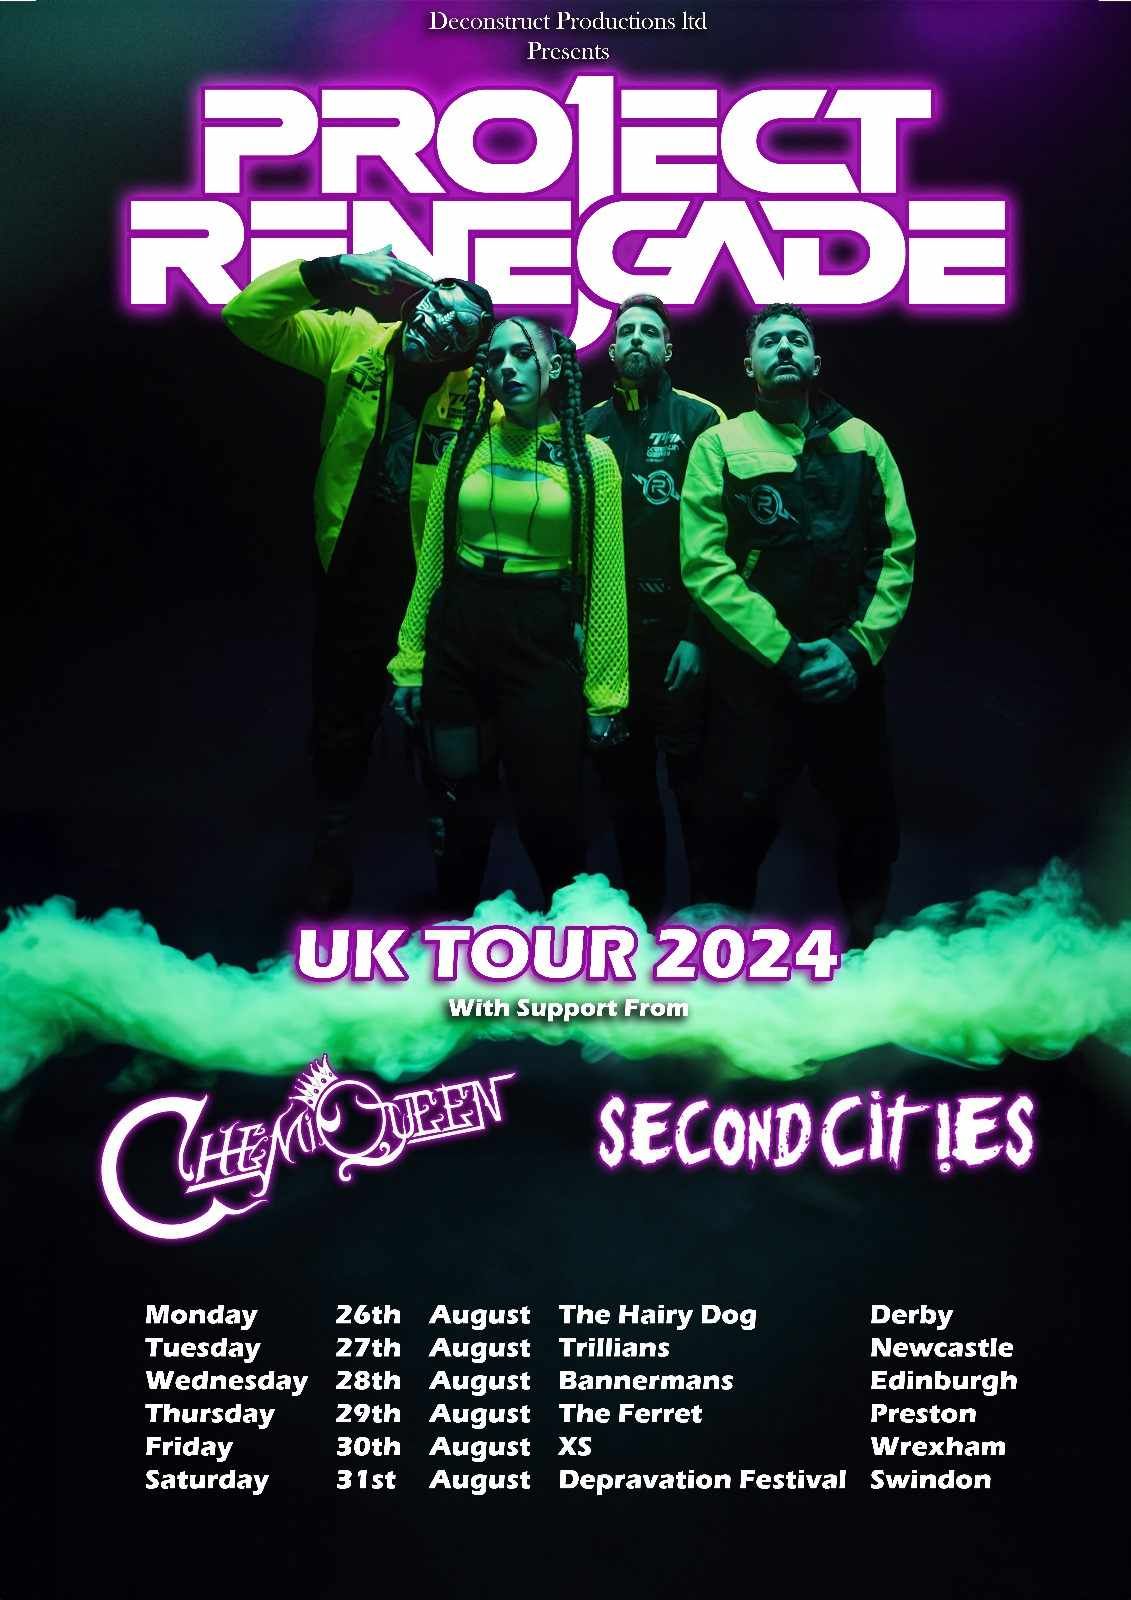 Project Renegade UK Tour 2024 with Chemiqueen & Second Cities